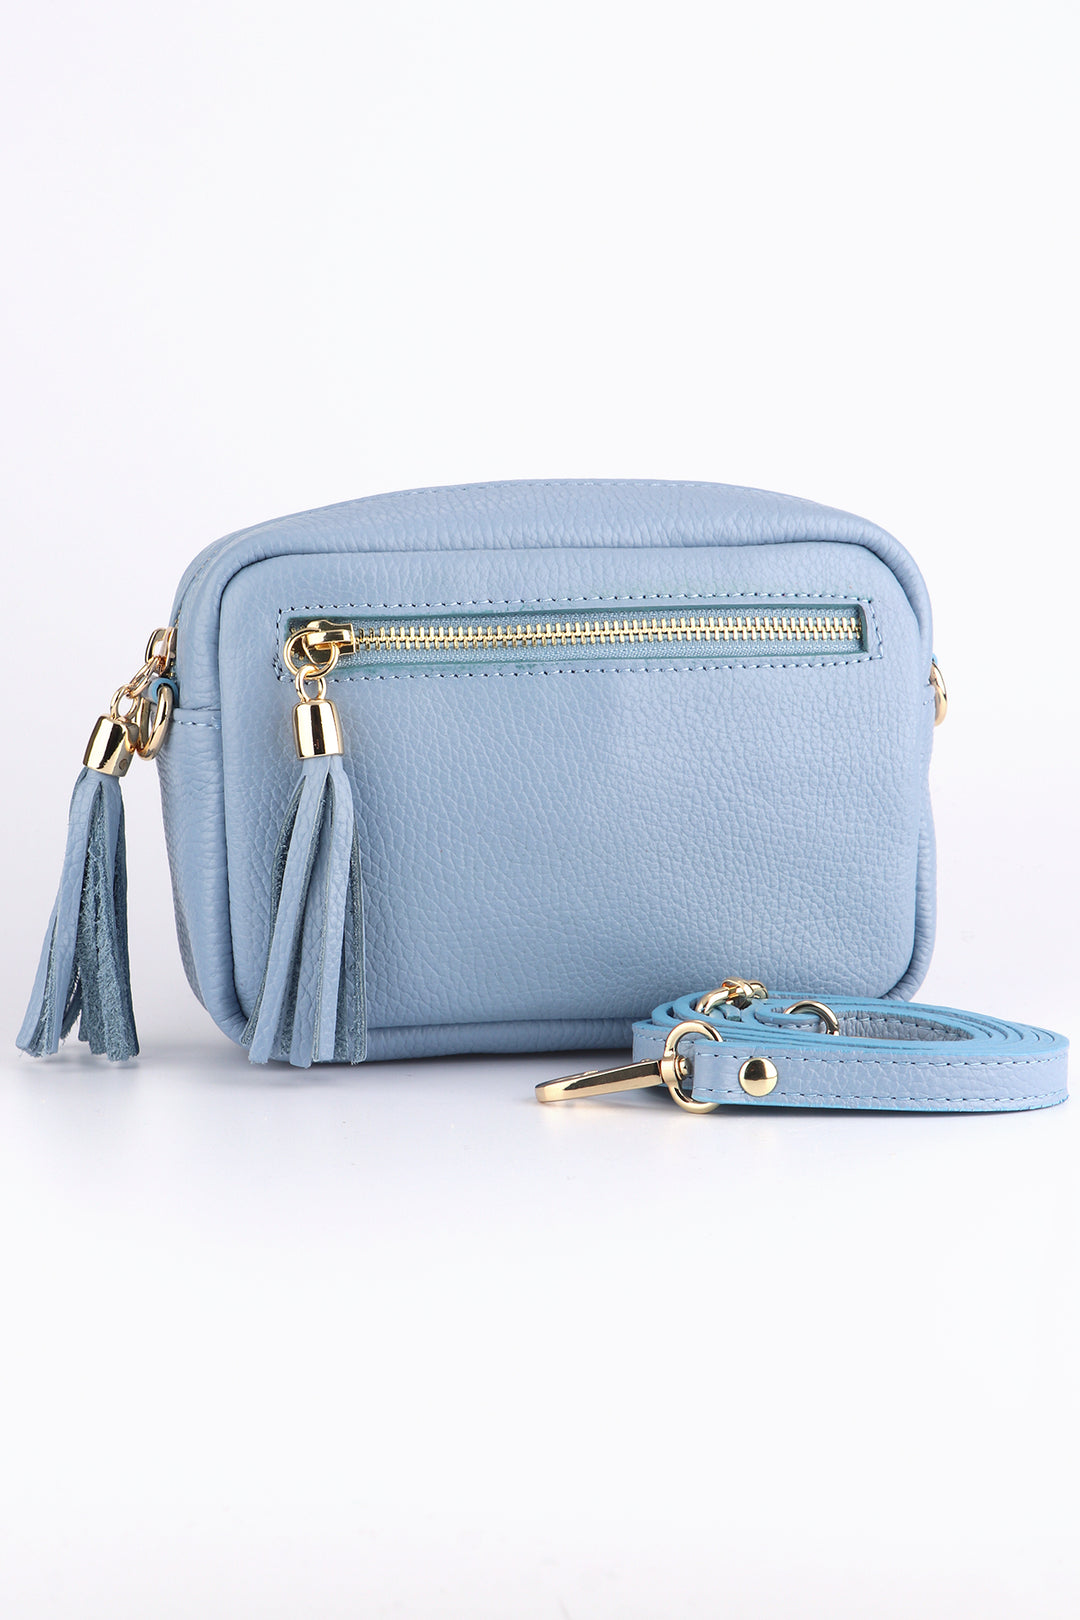 light blue leather small crossbody bag with detachable strap and zip closure compartments